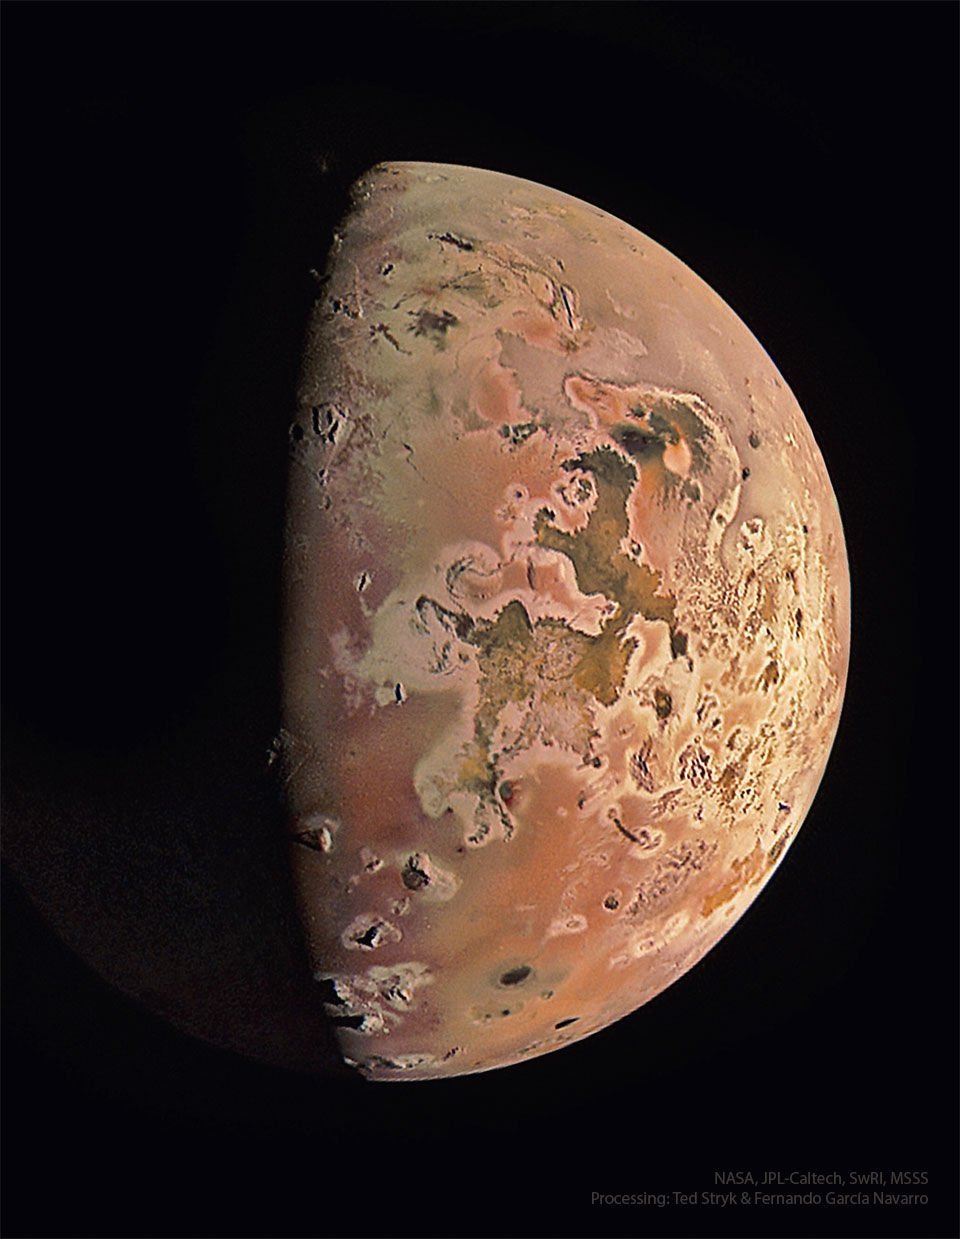 Jupiter's moon Io is shown as photogaphred recently
by NASA's passing Juno spacecraft. The moon is nearly half-
lit by the distant Sun and shows a complex surface including
the colors yellow, orange, and dark brown. Near the top, the
plume of an active volcano can be seen.
Please see the explanation for more detailed information.